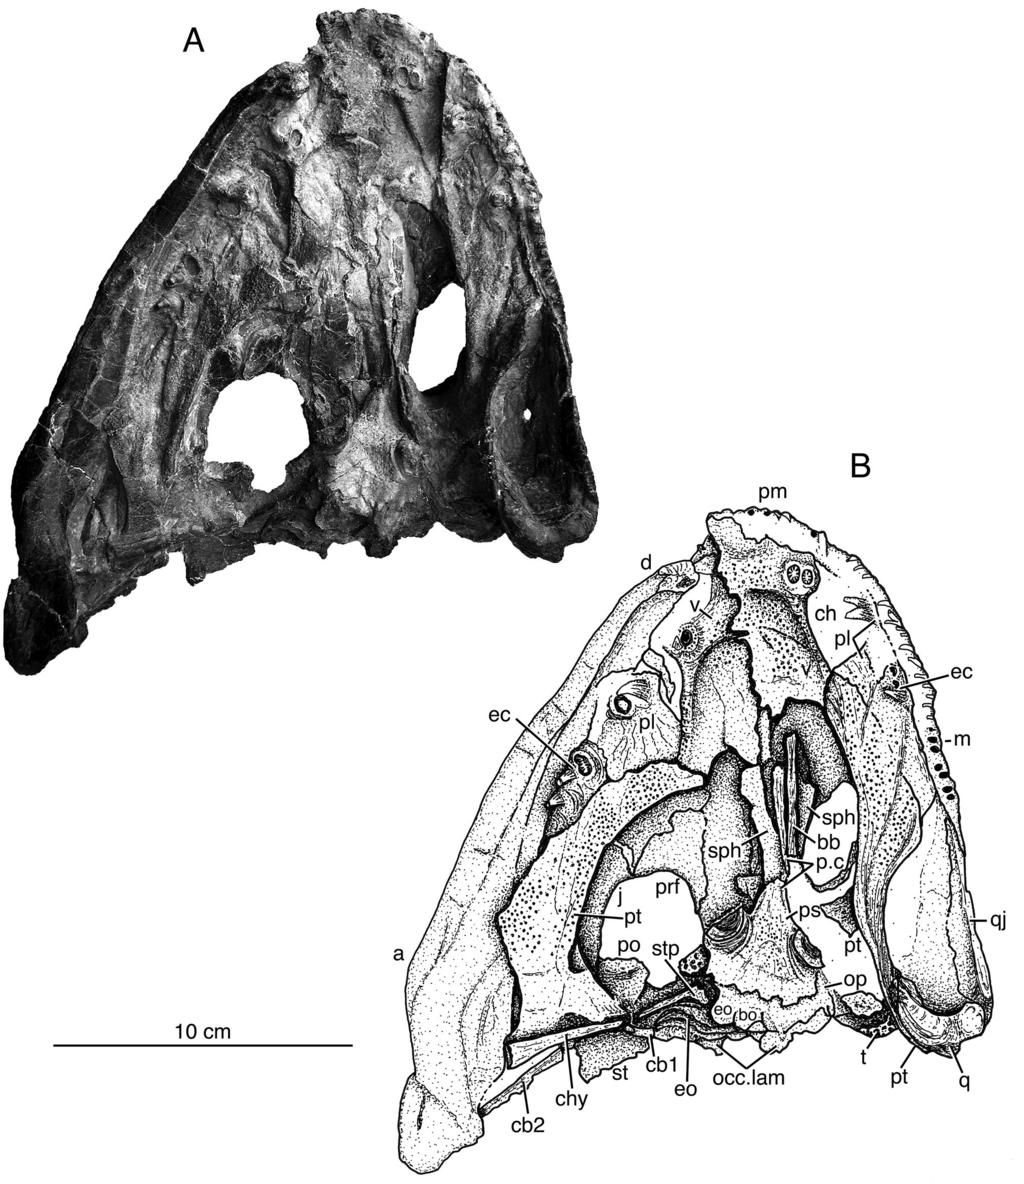 42 annals of carnegie museum vol. 81 Fig. 9. Skull with right mandible of Glaukerpeton avinoffi, referred specimen CMNH 11025, in ventral view. A, photograph; and B, illustration.